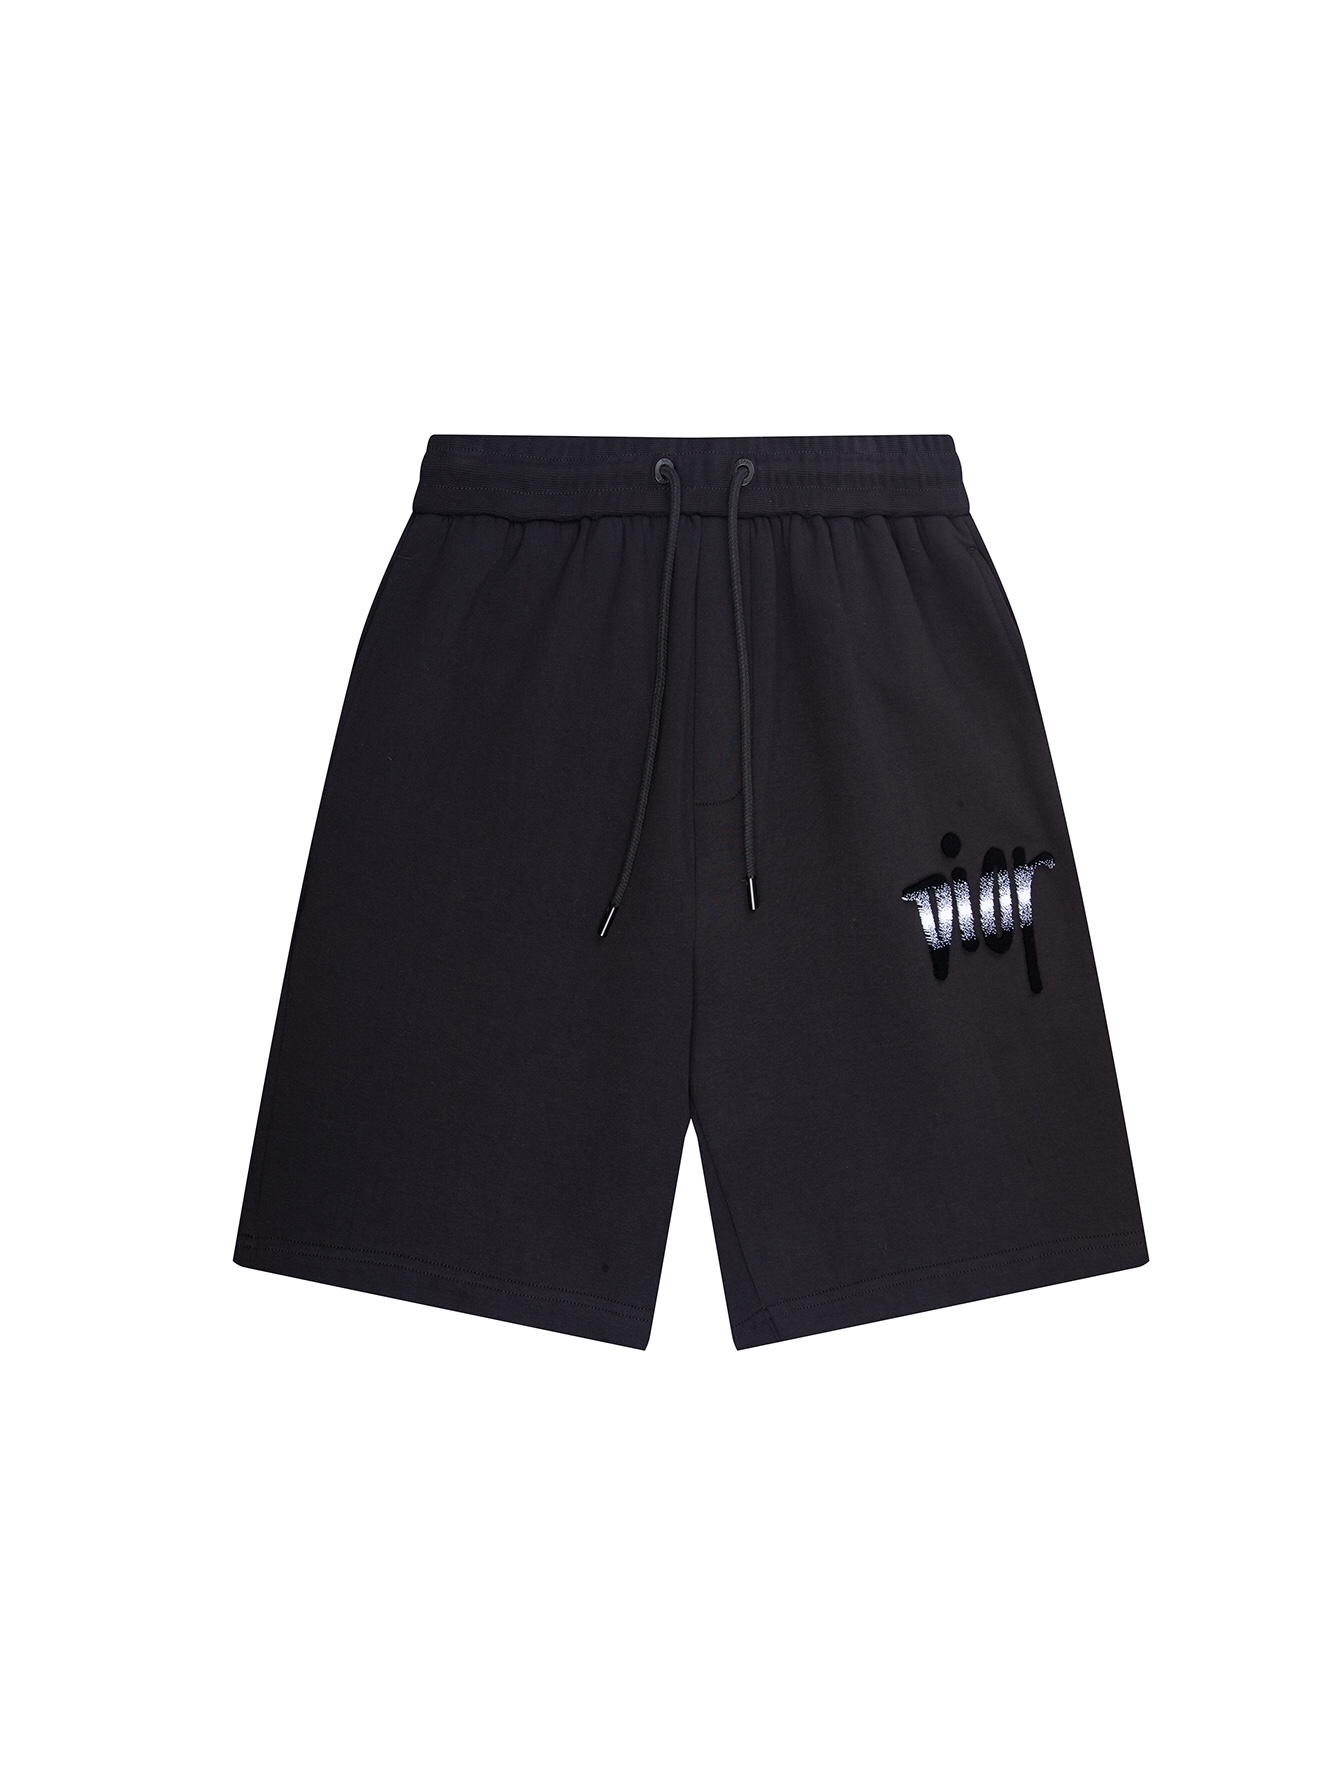 Replica Best
 Dior Clothing Shorts Buy 1:1
 Black Embroidery Cotton Casual